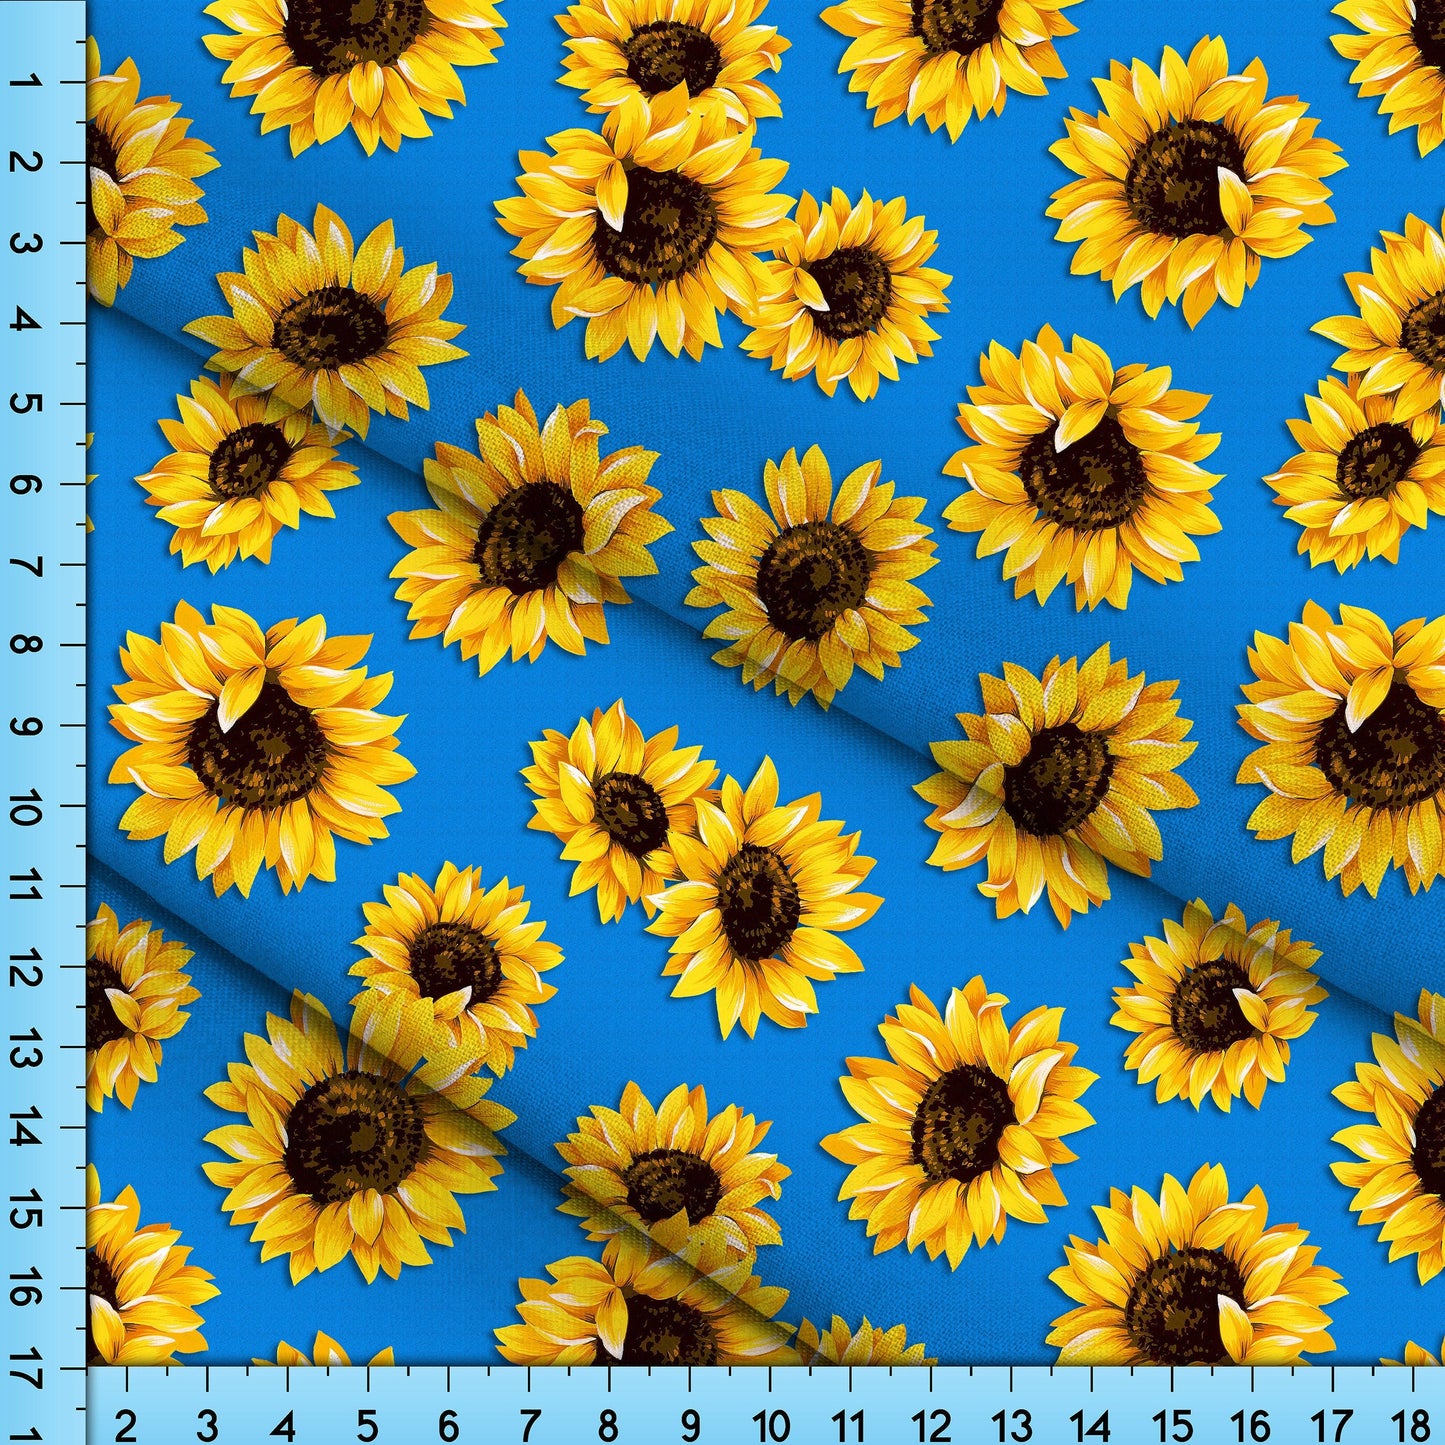 Sunflower Fabric on Blue Background, Printed By the Yard on your choice of fabrics